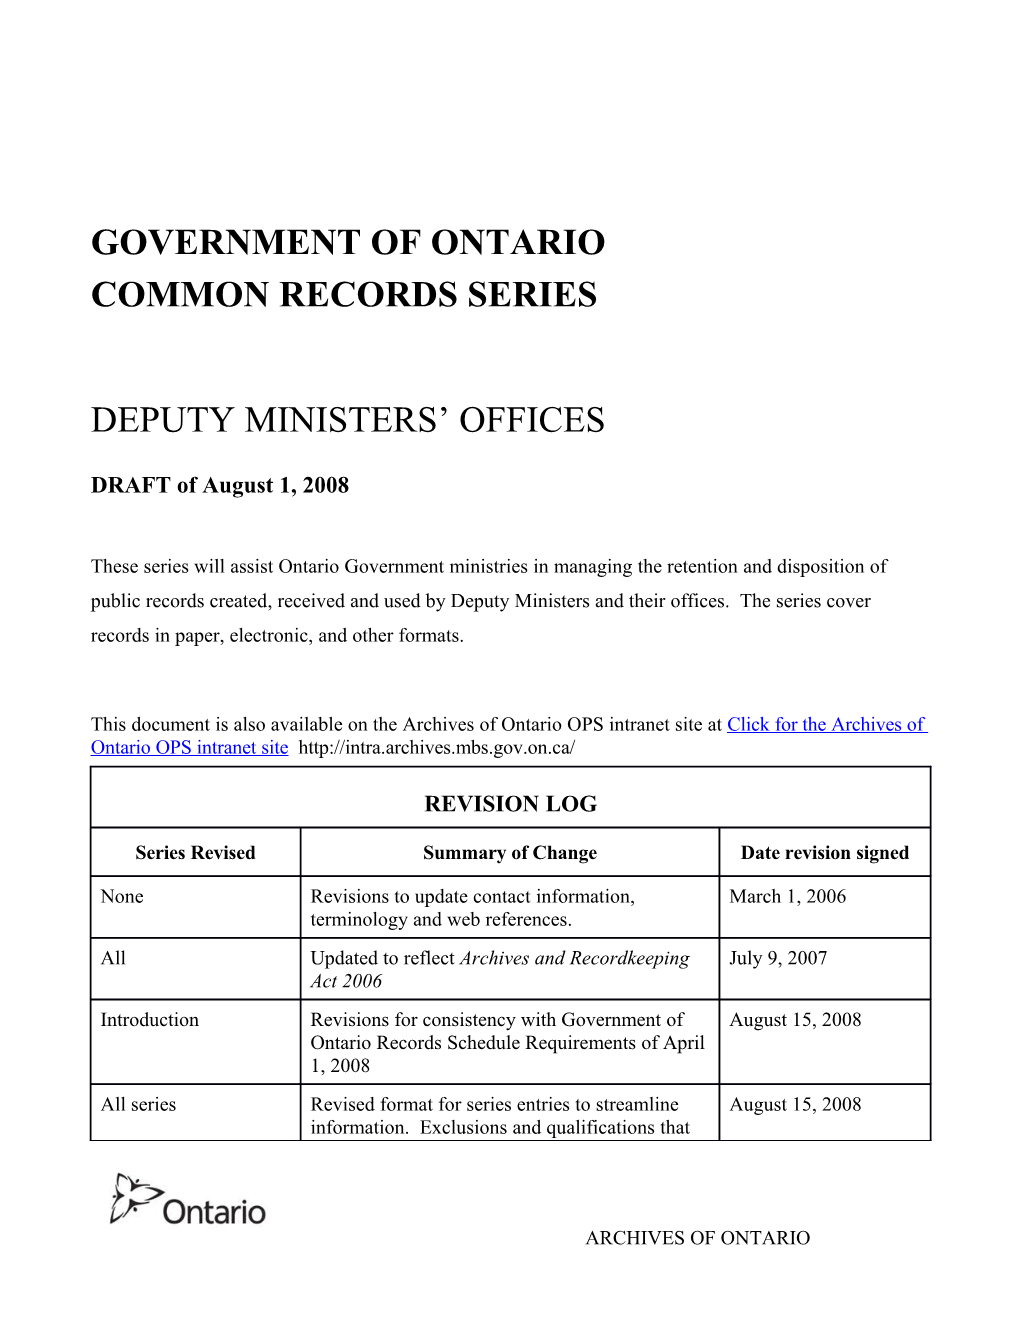 Government of Ontario Common Records Series